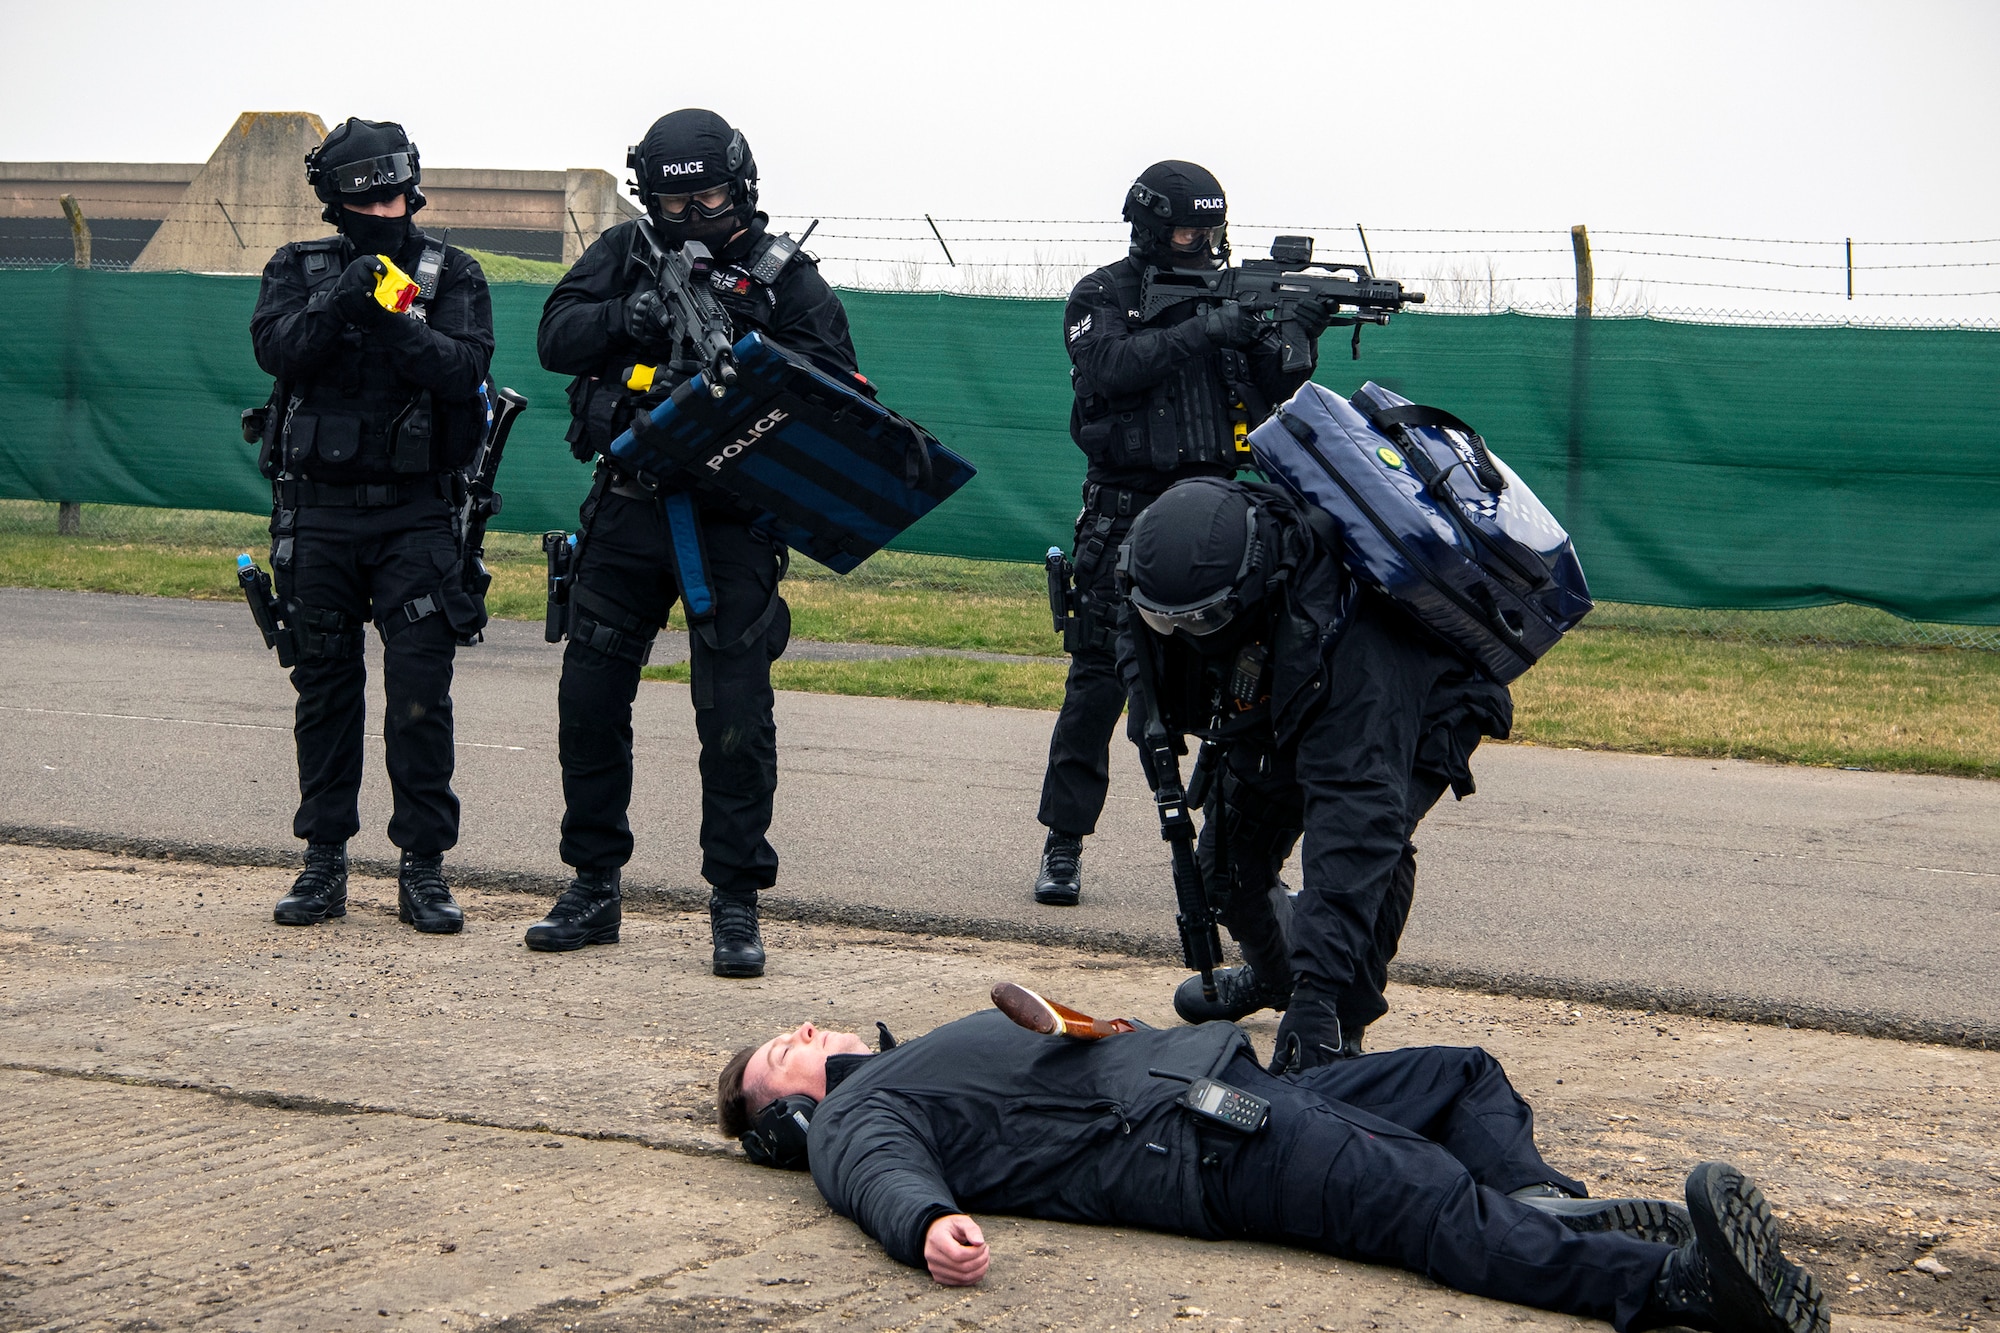 Policemen from the Northamptonshire Police Department, apprehend a simulated active shooter during a field training exercise at RAF Croughton, England, March 3, 2021. The NHPD utilized the 422d Security Forces Squadron training complex to help strengthen their tactics and techniques. Events like this help strengthen the local partnership between the 422d SFS and the NHPD. (U.S. Air Force photo by Senior Airman Eugene Oliver)